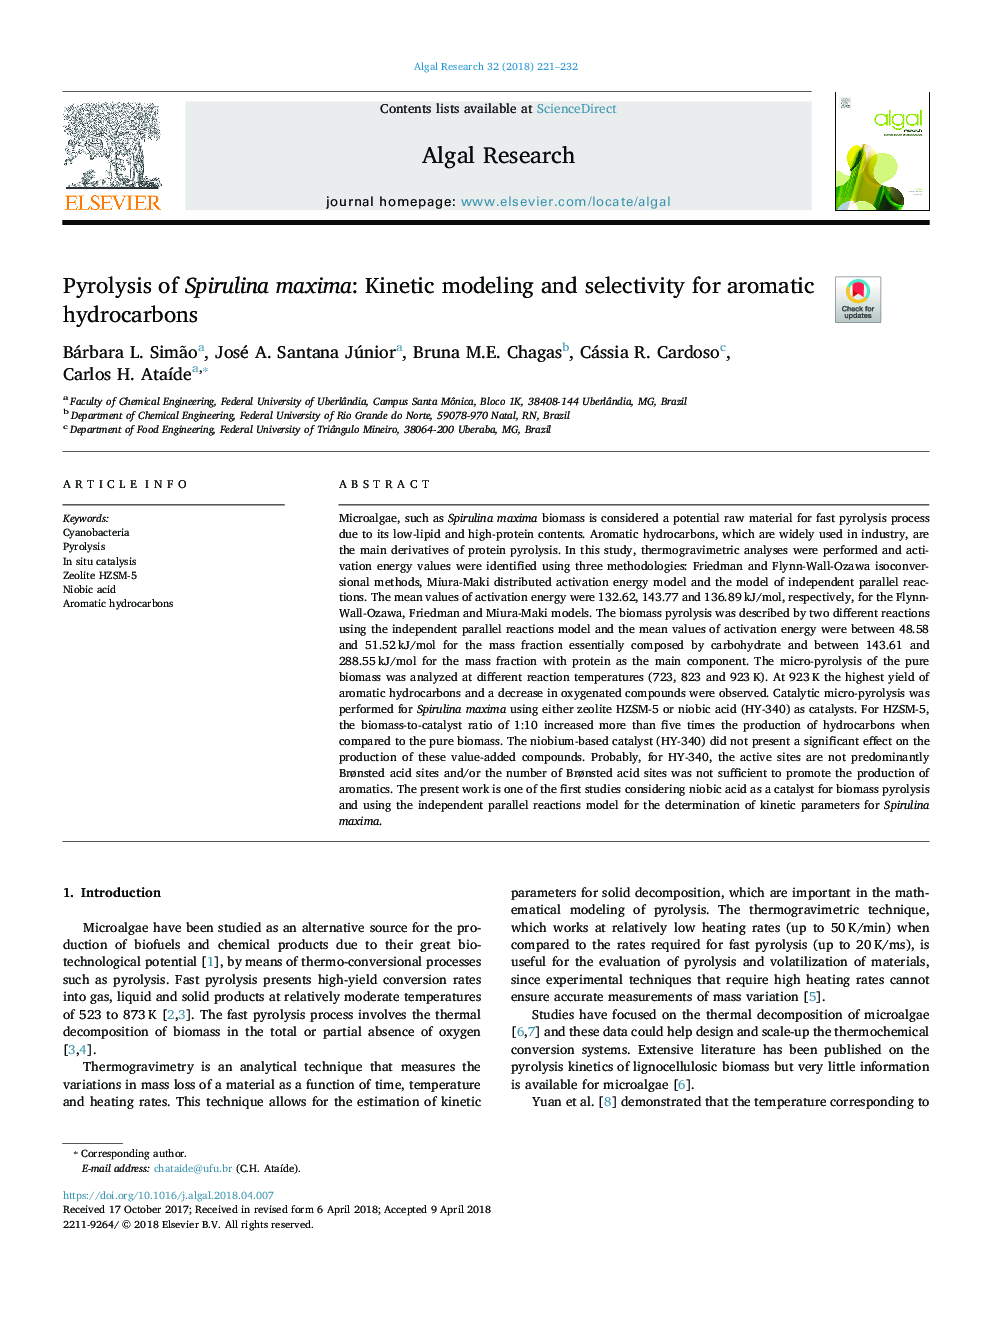 Pyrolysis of Spirulina maxima: Kinetic modeling and selectivity for aromatic hydrocarbons